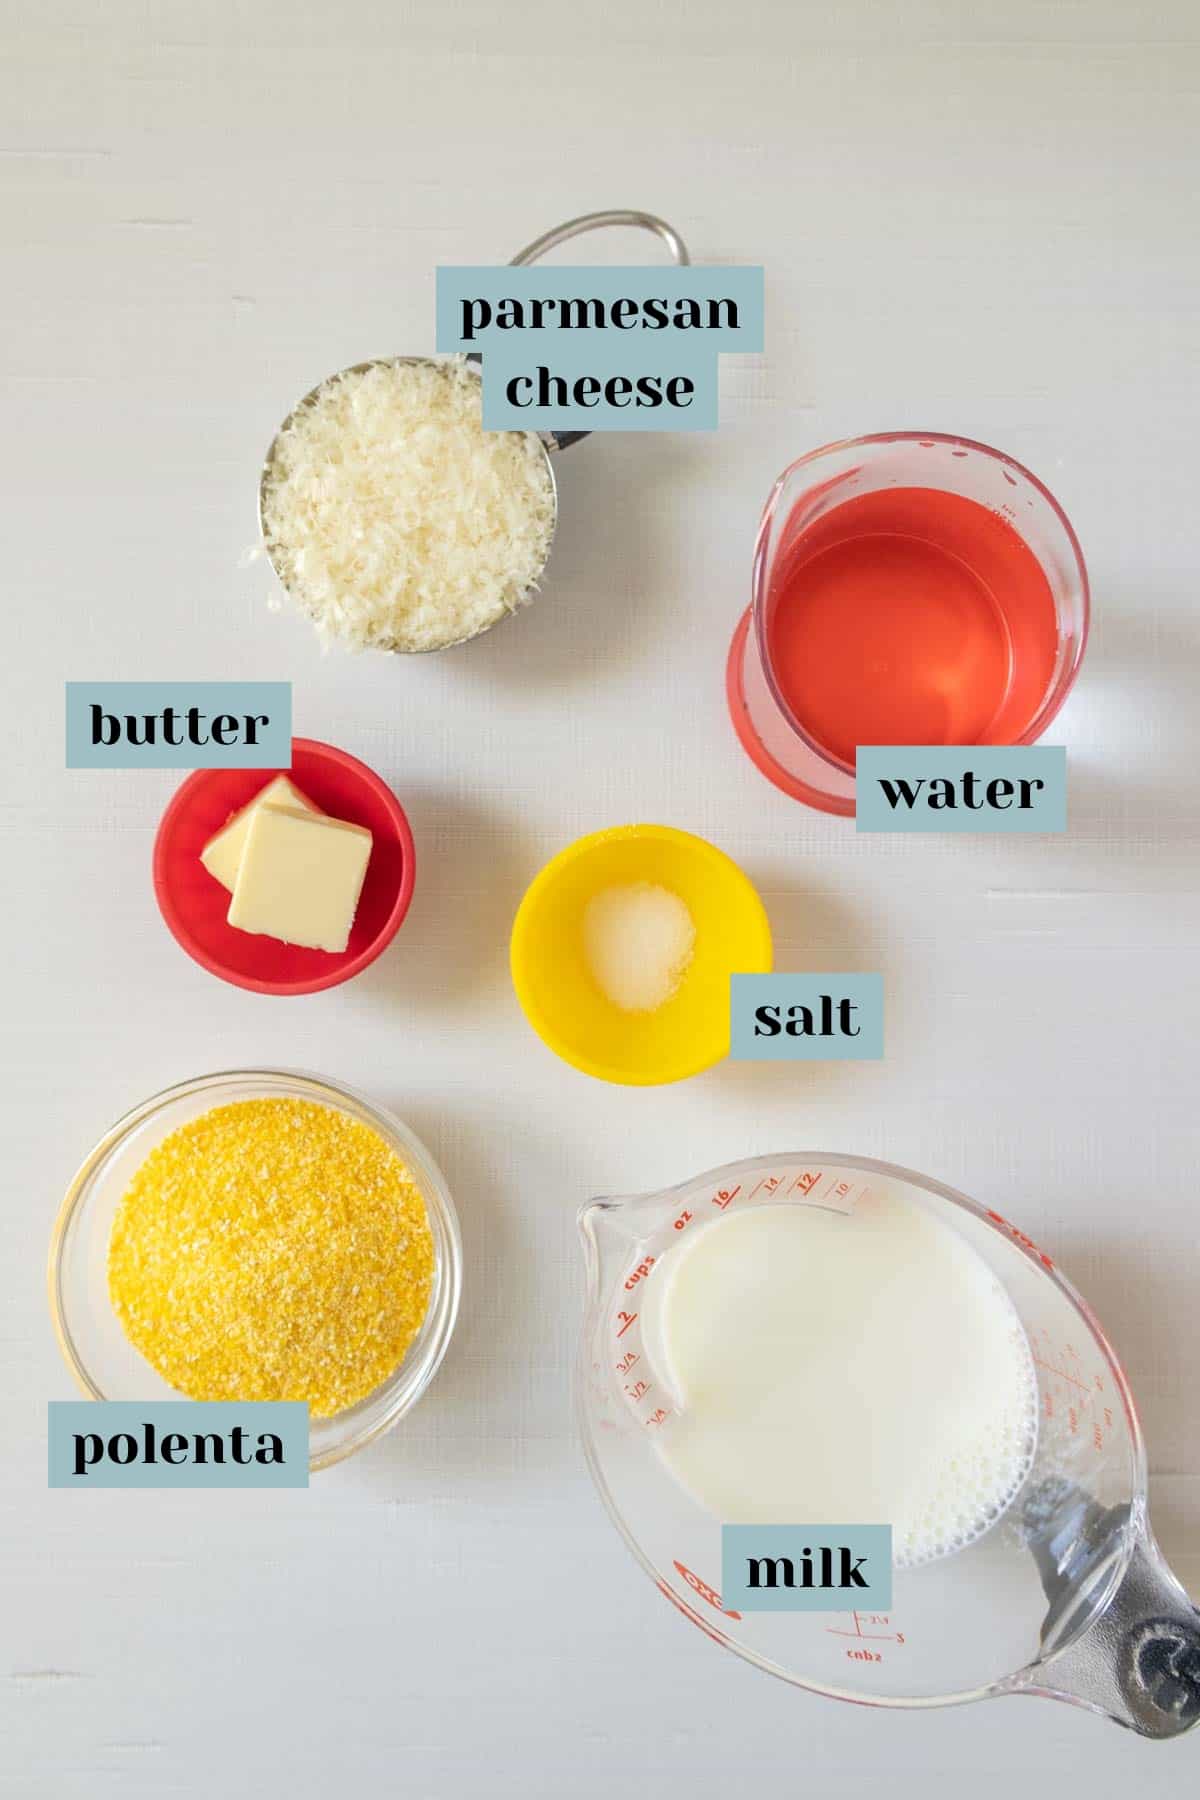 Ingredients for cheesy polenta on a white surface with labels.